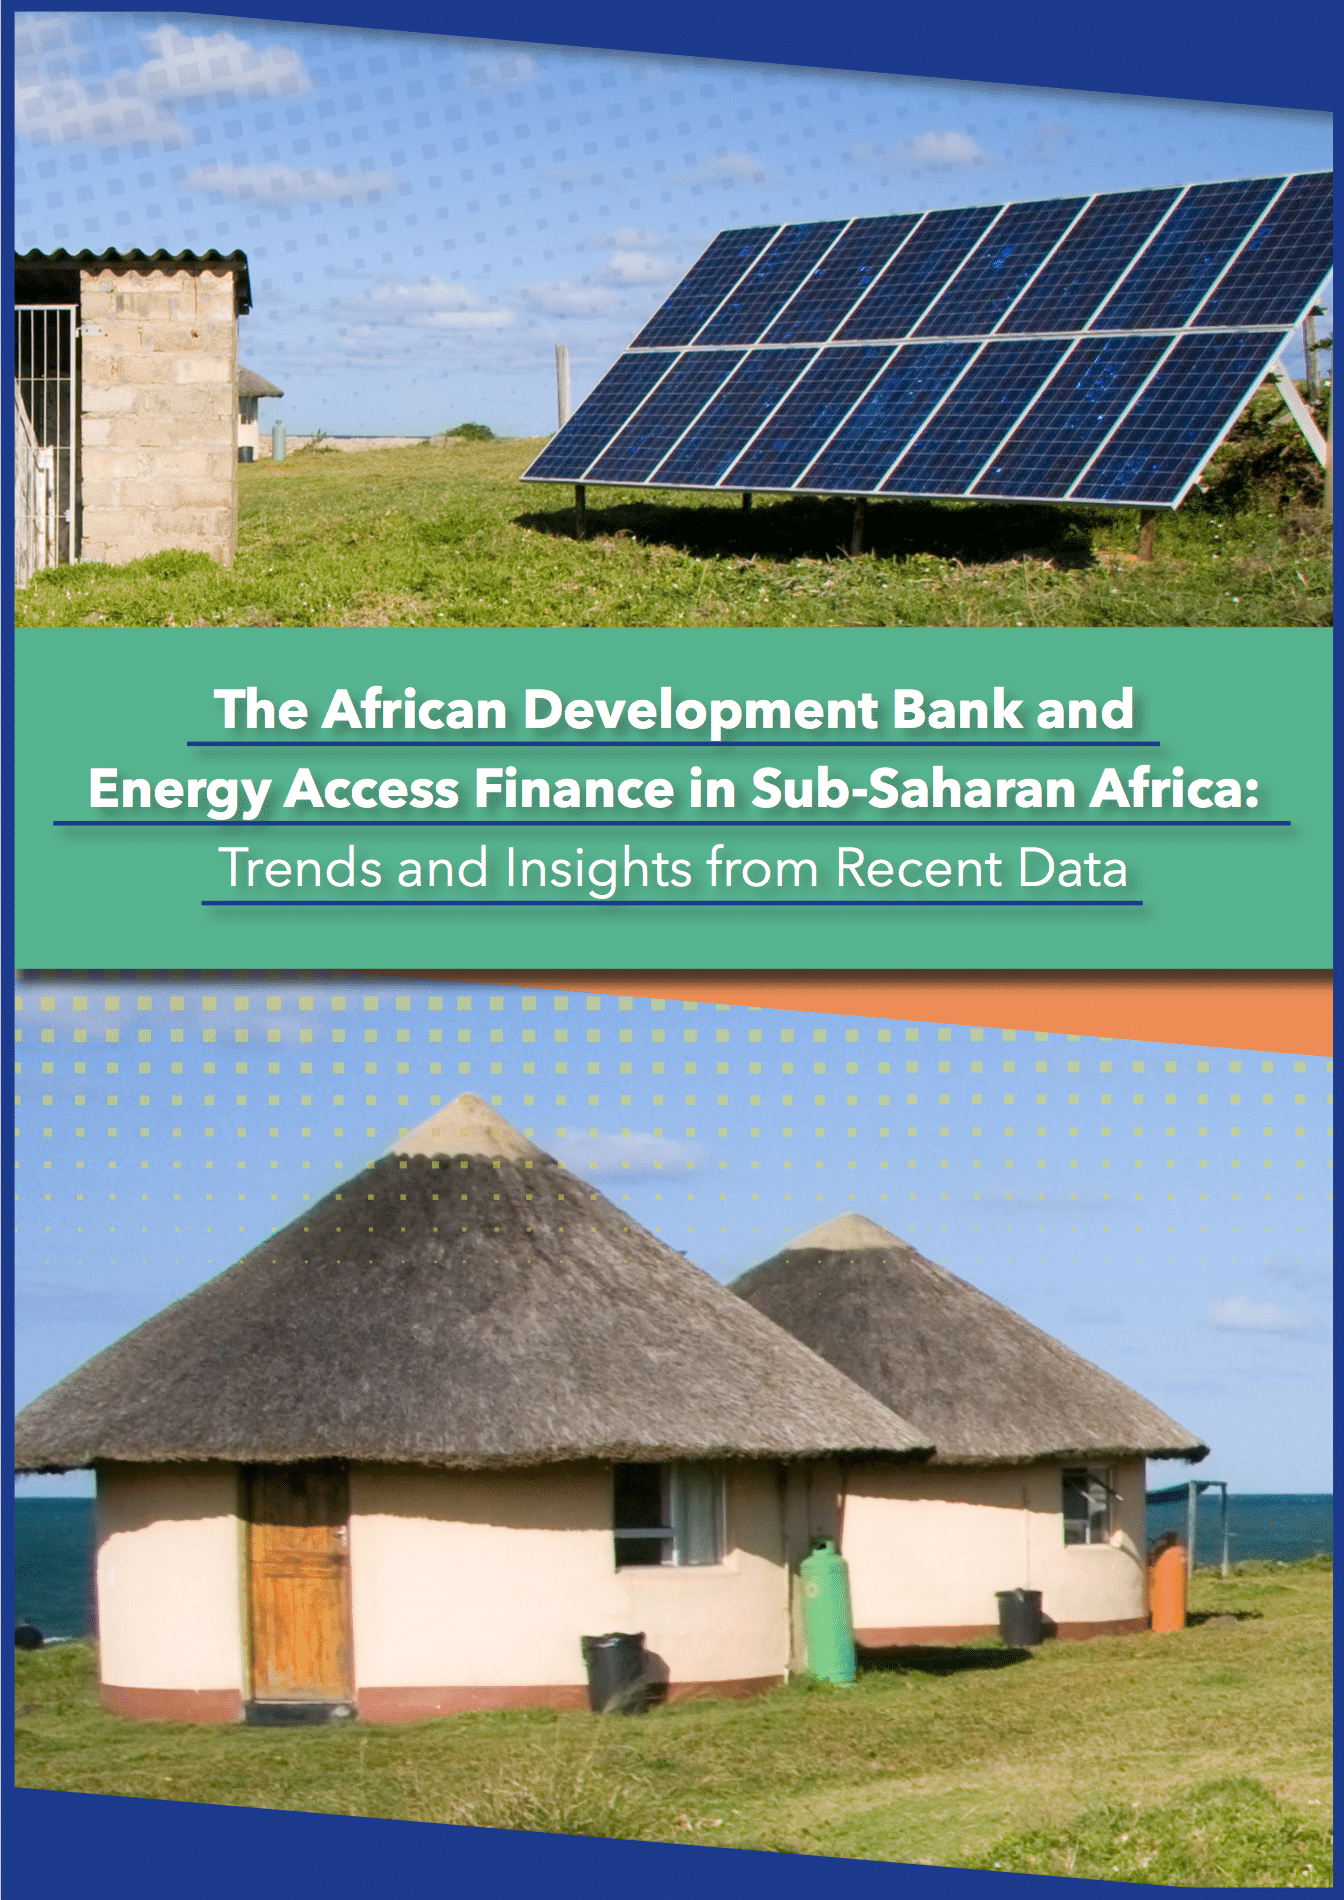 The African Development Bank & Energy Access Finance in Sub-Saharan Africa: Trends and Insights from Recent Data